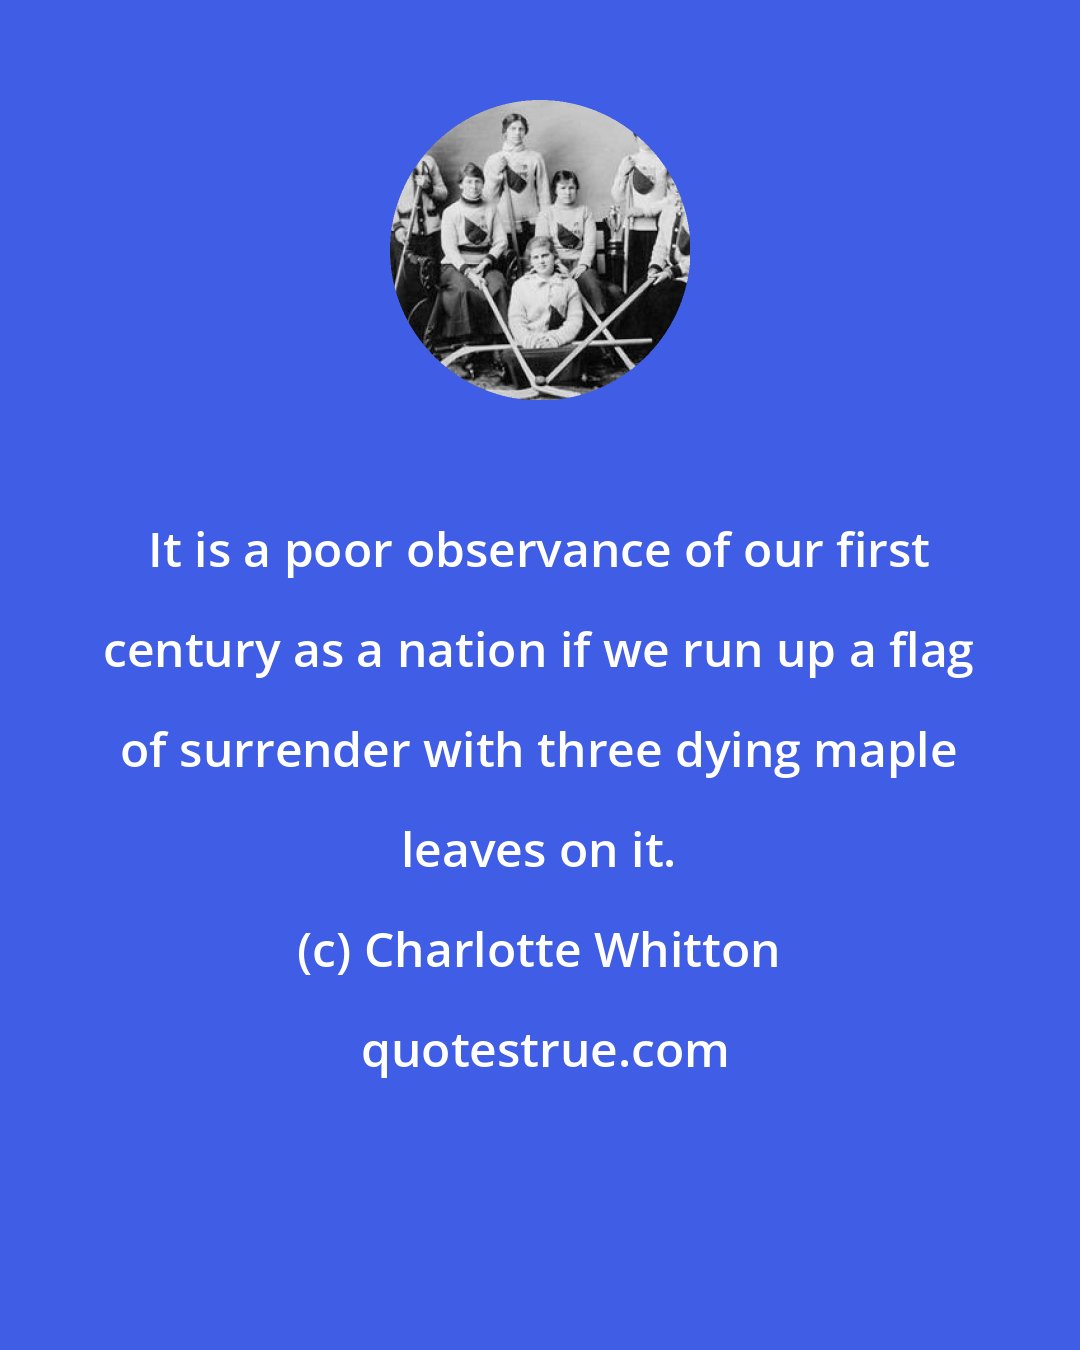 Charlotte Whitton: It is a poor observance of our first century as a nation if we run up a flag of surrender with three dying maple leaves on it.